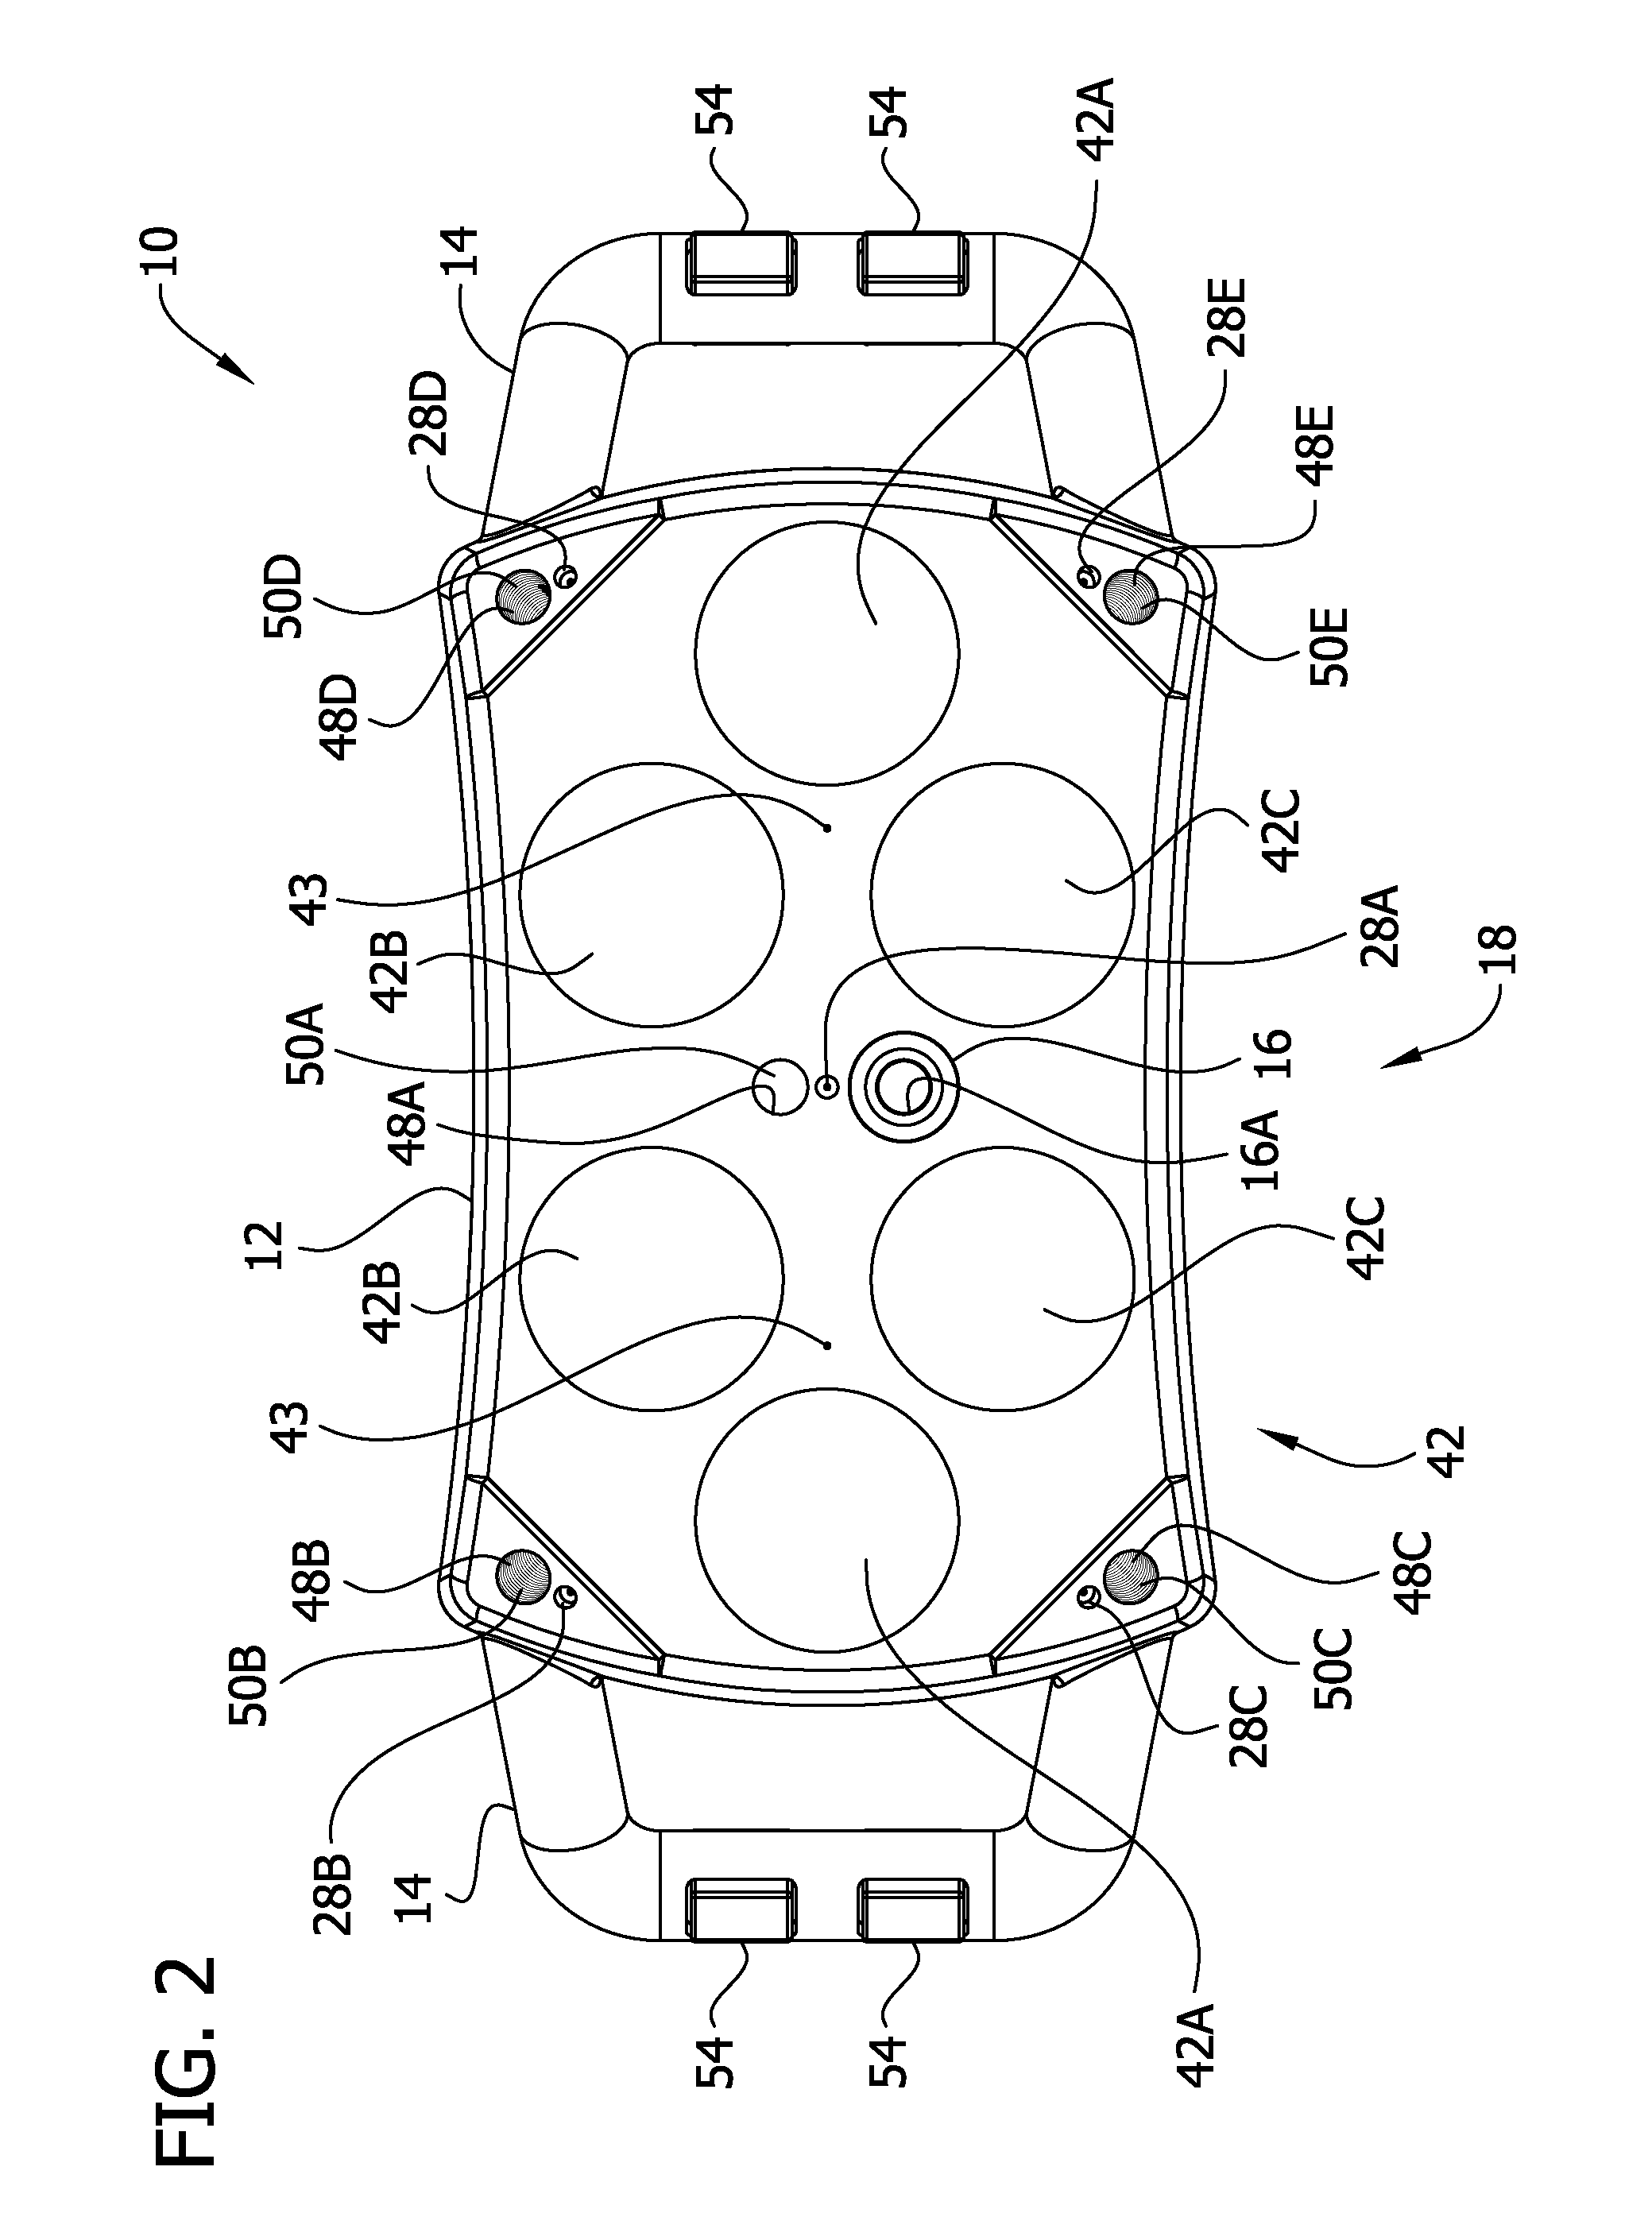 Systems, apparatus, and methods for acquisition and use of image data